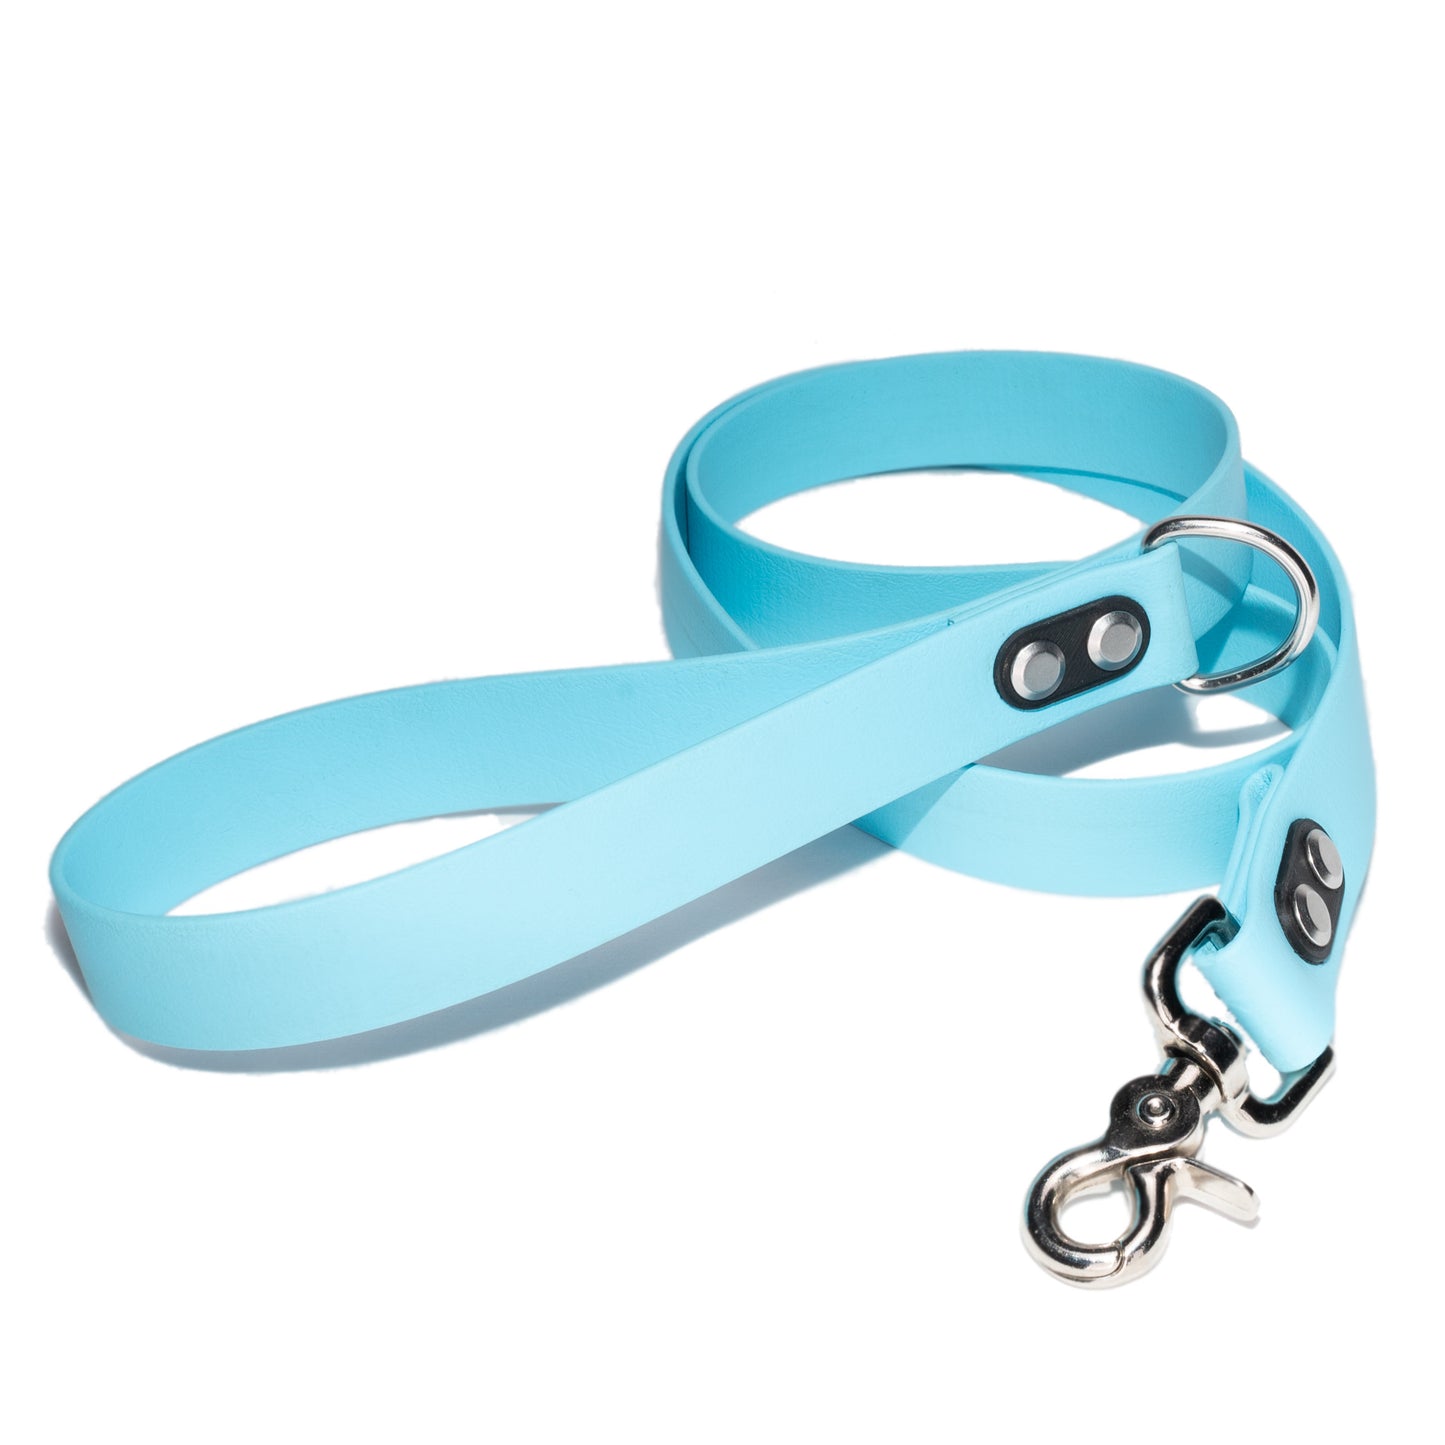 sky blue dog leash made with a trigger swivel snap and black hardware created by darn.dog